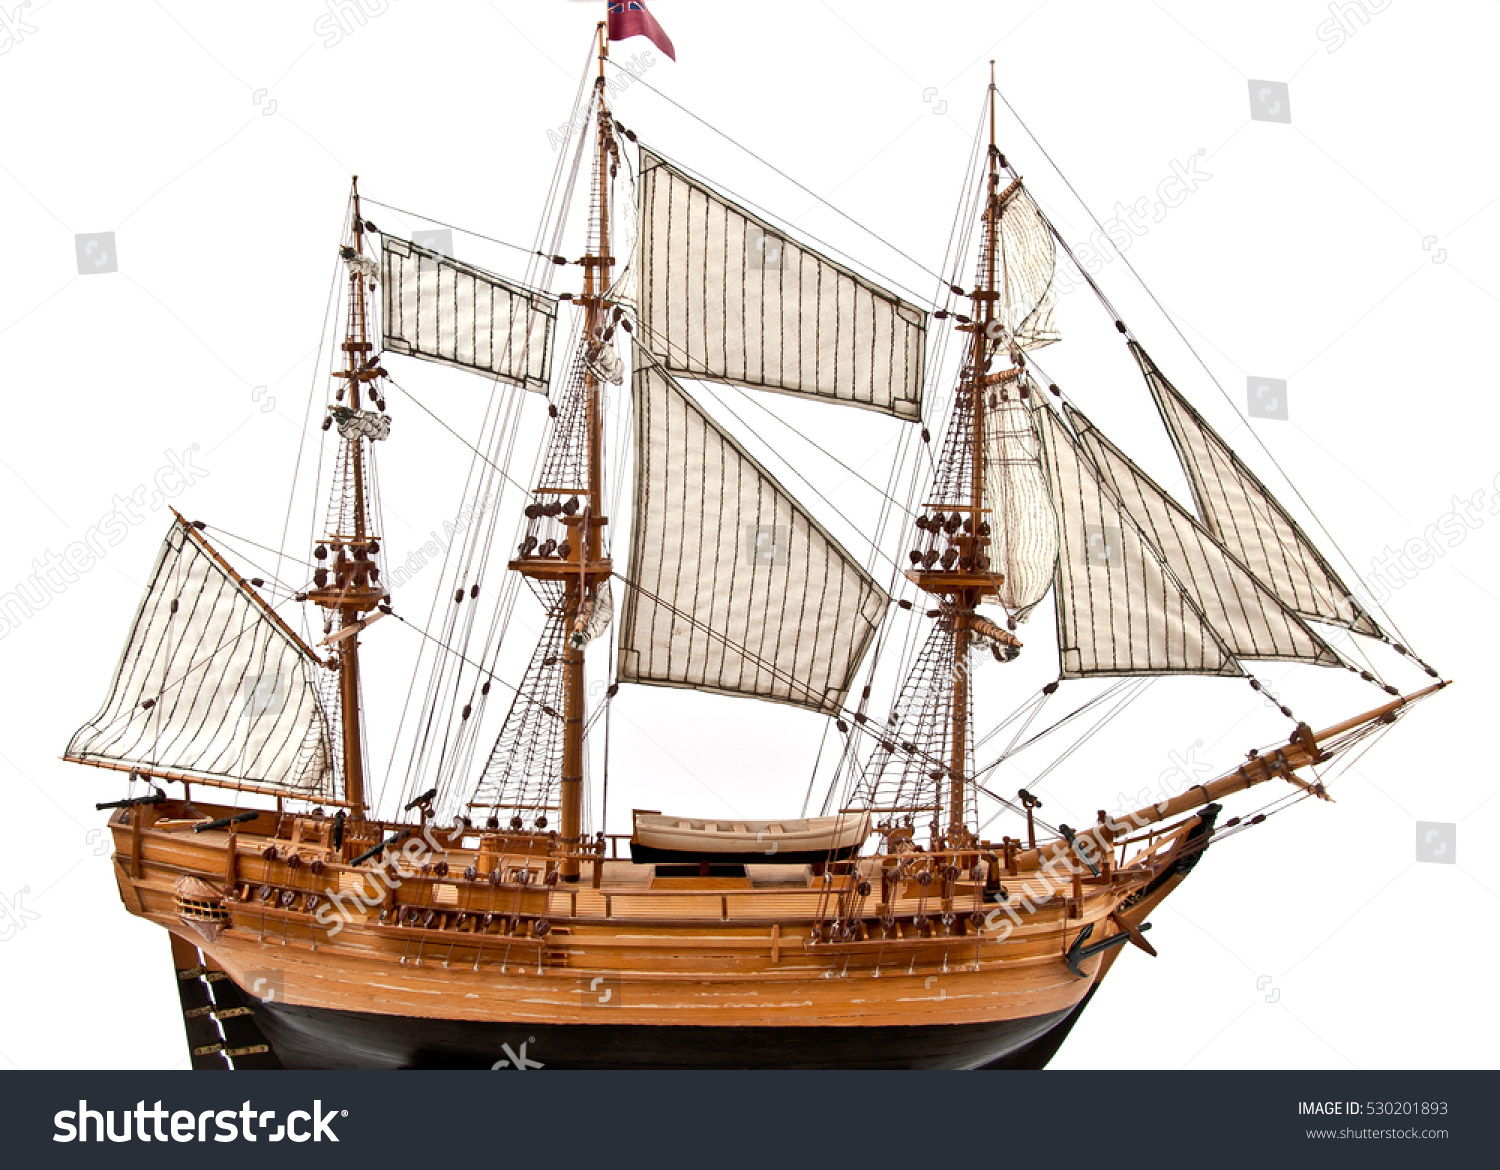 Il fascino dei velieri Stock-photo-model-of-wooden-sailing-ship-with-three-mast-isolated-on-white-530201893